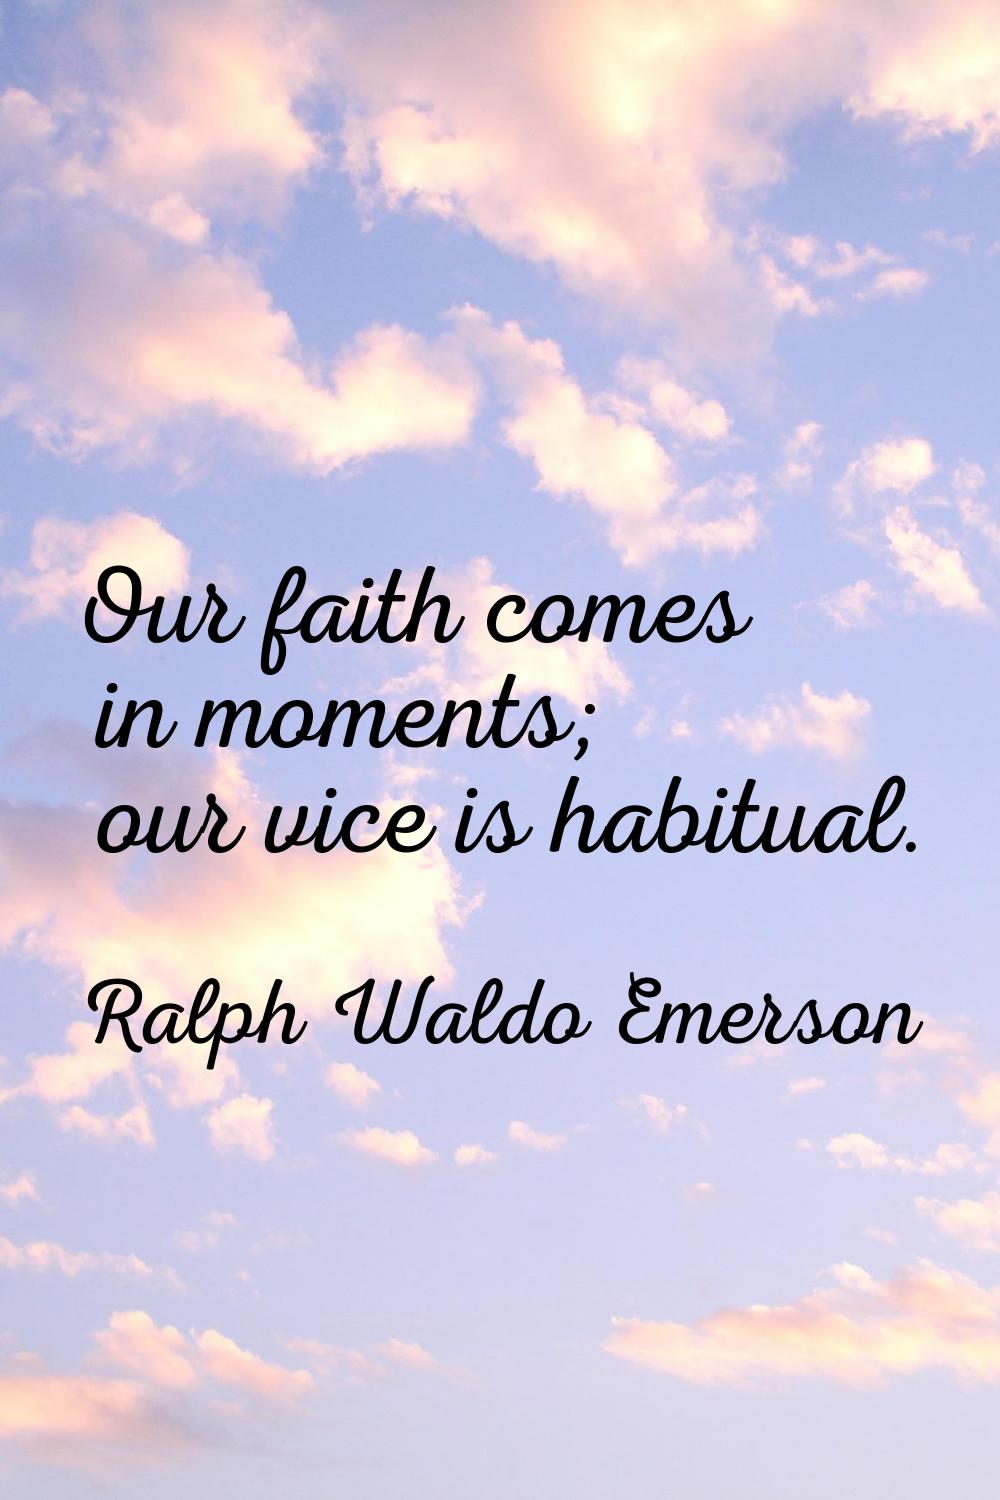 Our faith comes in moments; our vice is habitual.